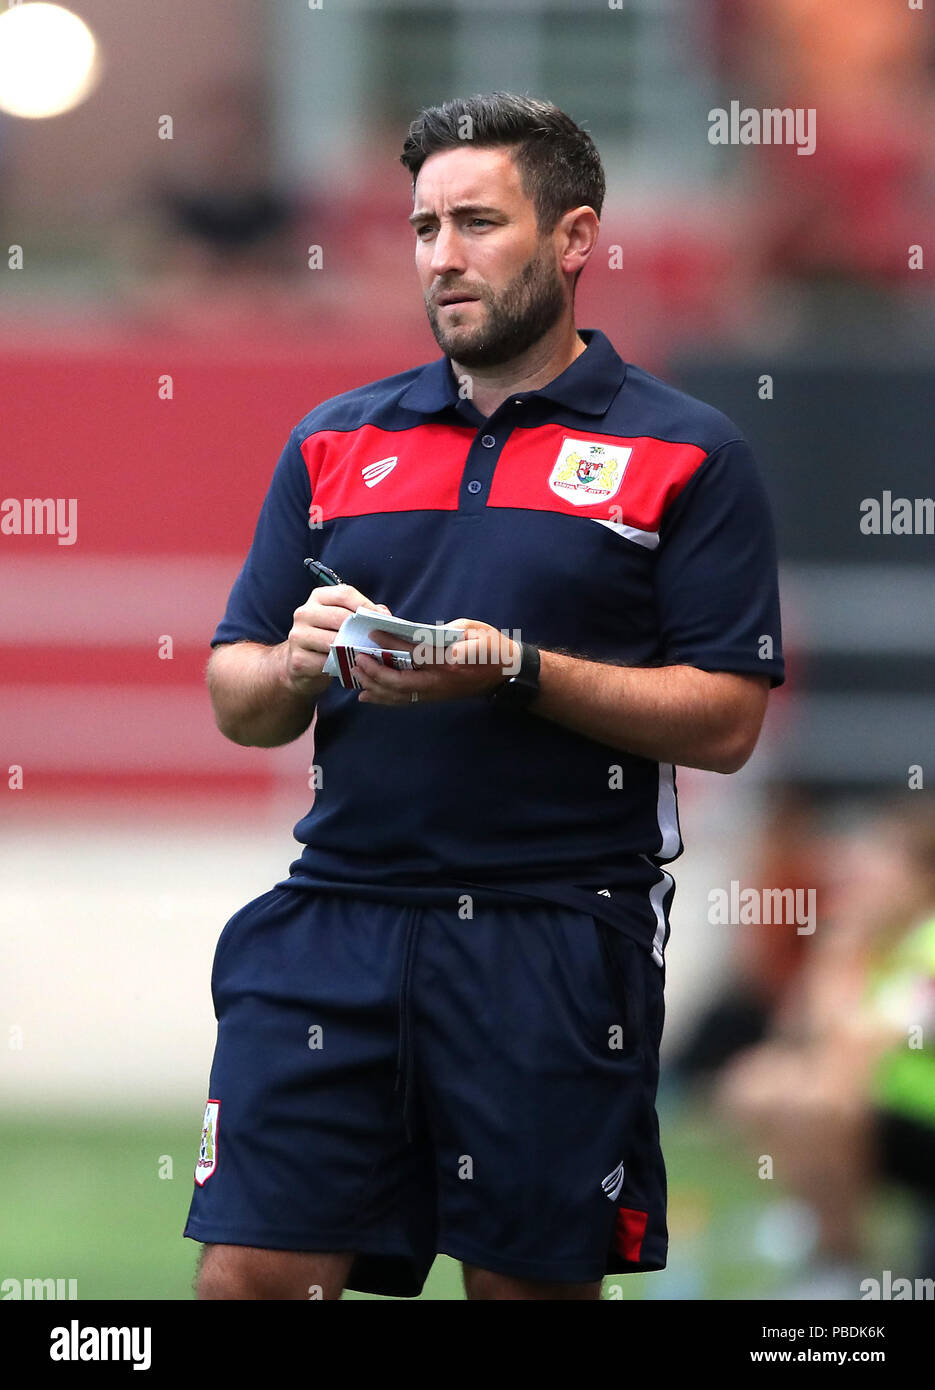 Bristol City Head Coach Lee Johnson during a pre-season friendly match at Ashton Gate, Bristol. PRESS ASSOCIATION Photo. Picture date: Friday July 27, 2018. See PA story SOCCER Bristol City. Photo credit should read: Nick Potts/PA Wire. No use with unauthorised audio, video, data, fixture lists, club/league logos or "live" services. Online in-match use limited to 75 images, no video emulation. No use in betting, games or single club/league/player publications. Stock Photo